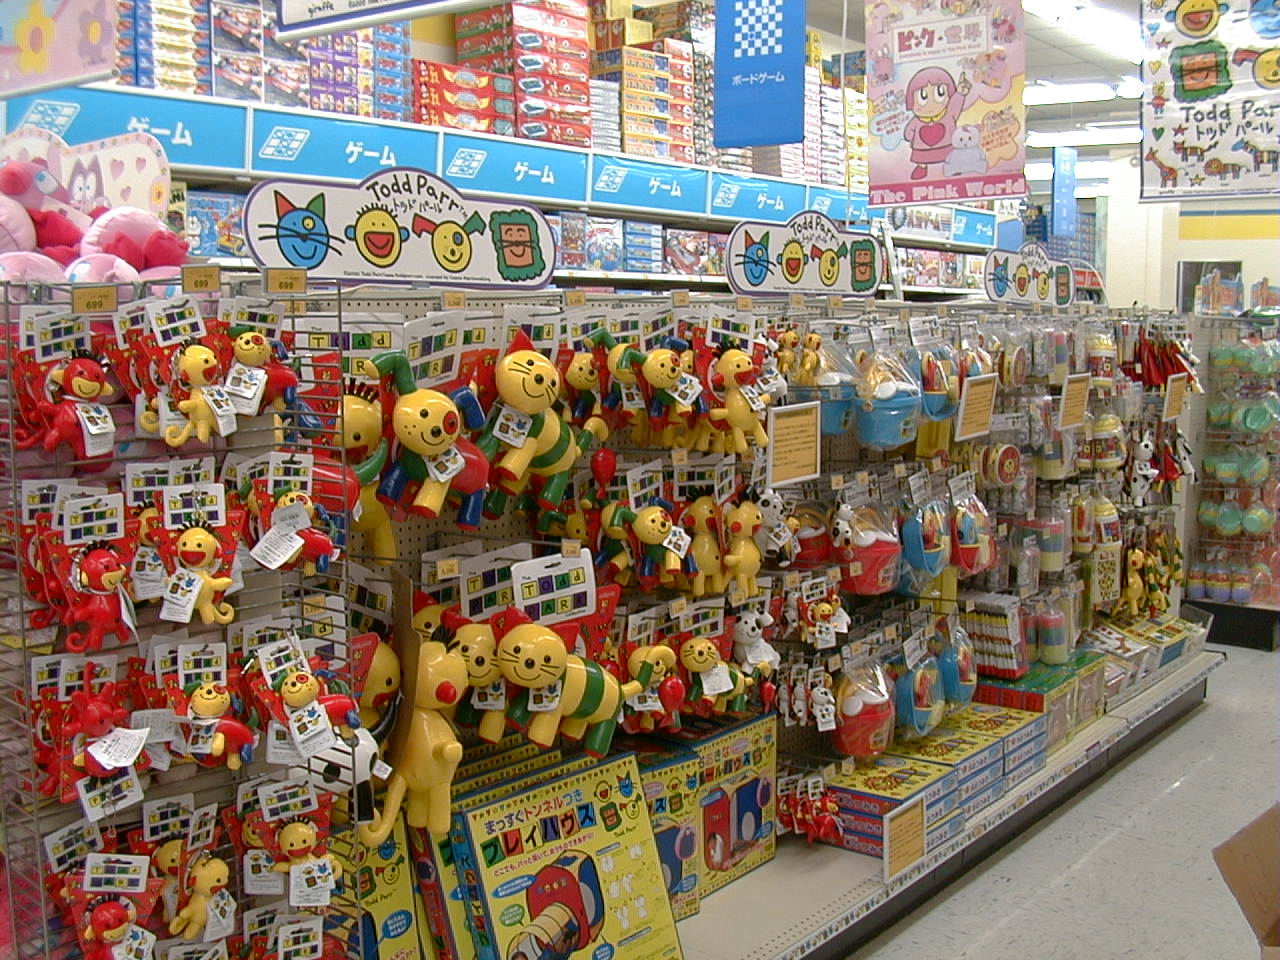 Todd Parr Toys on Shelves